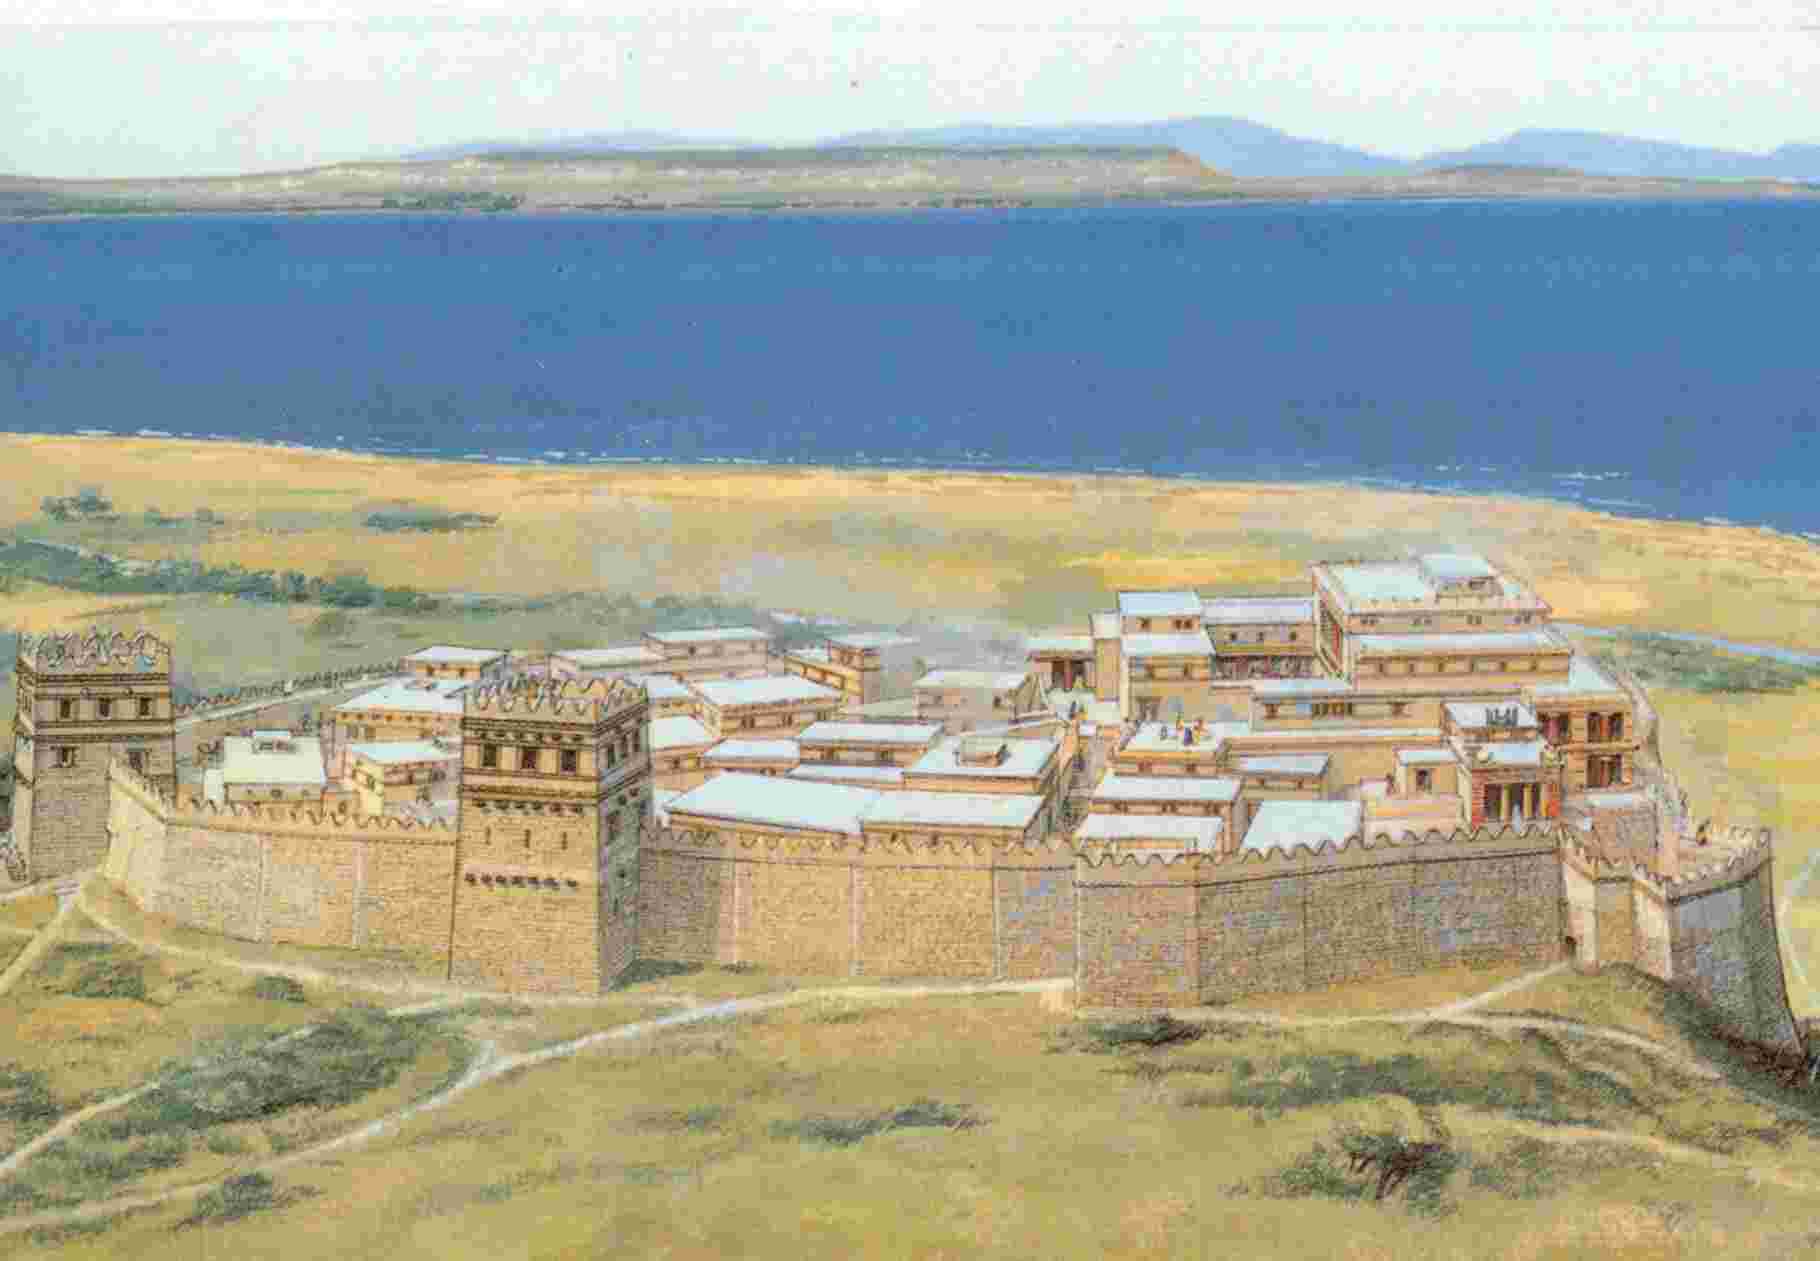 reconstruction of Troy's upper city